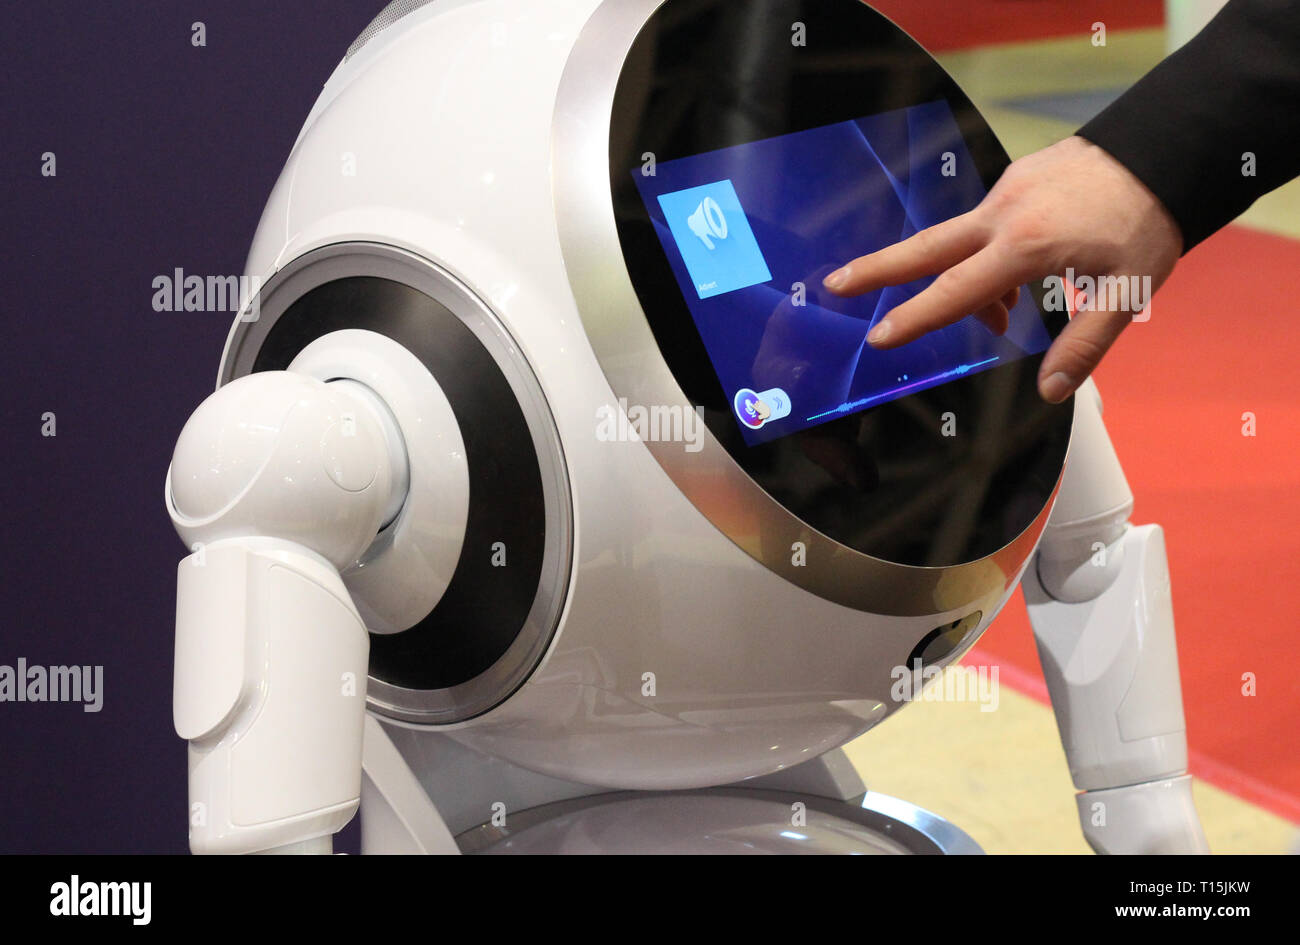 Smart robot for help around the house. Male hand adjusts the settings of the robot. Hand on the background of the display to set up a robot assistant. Stock Photo